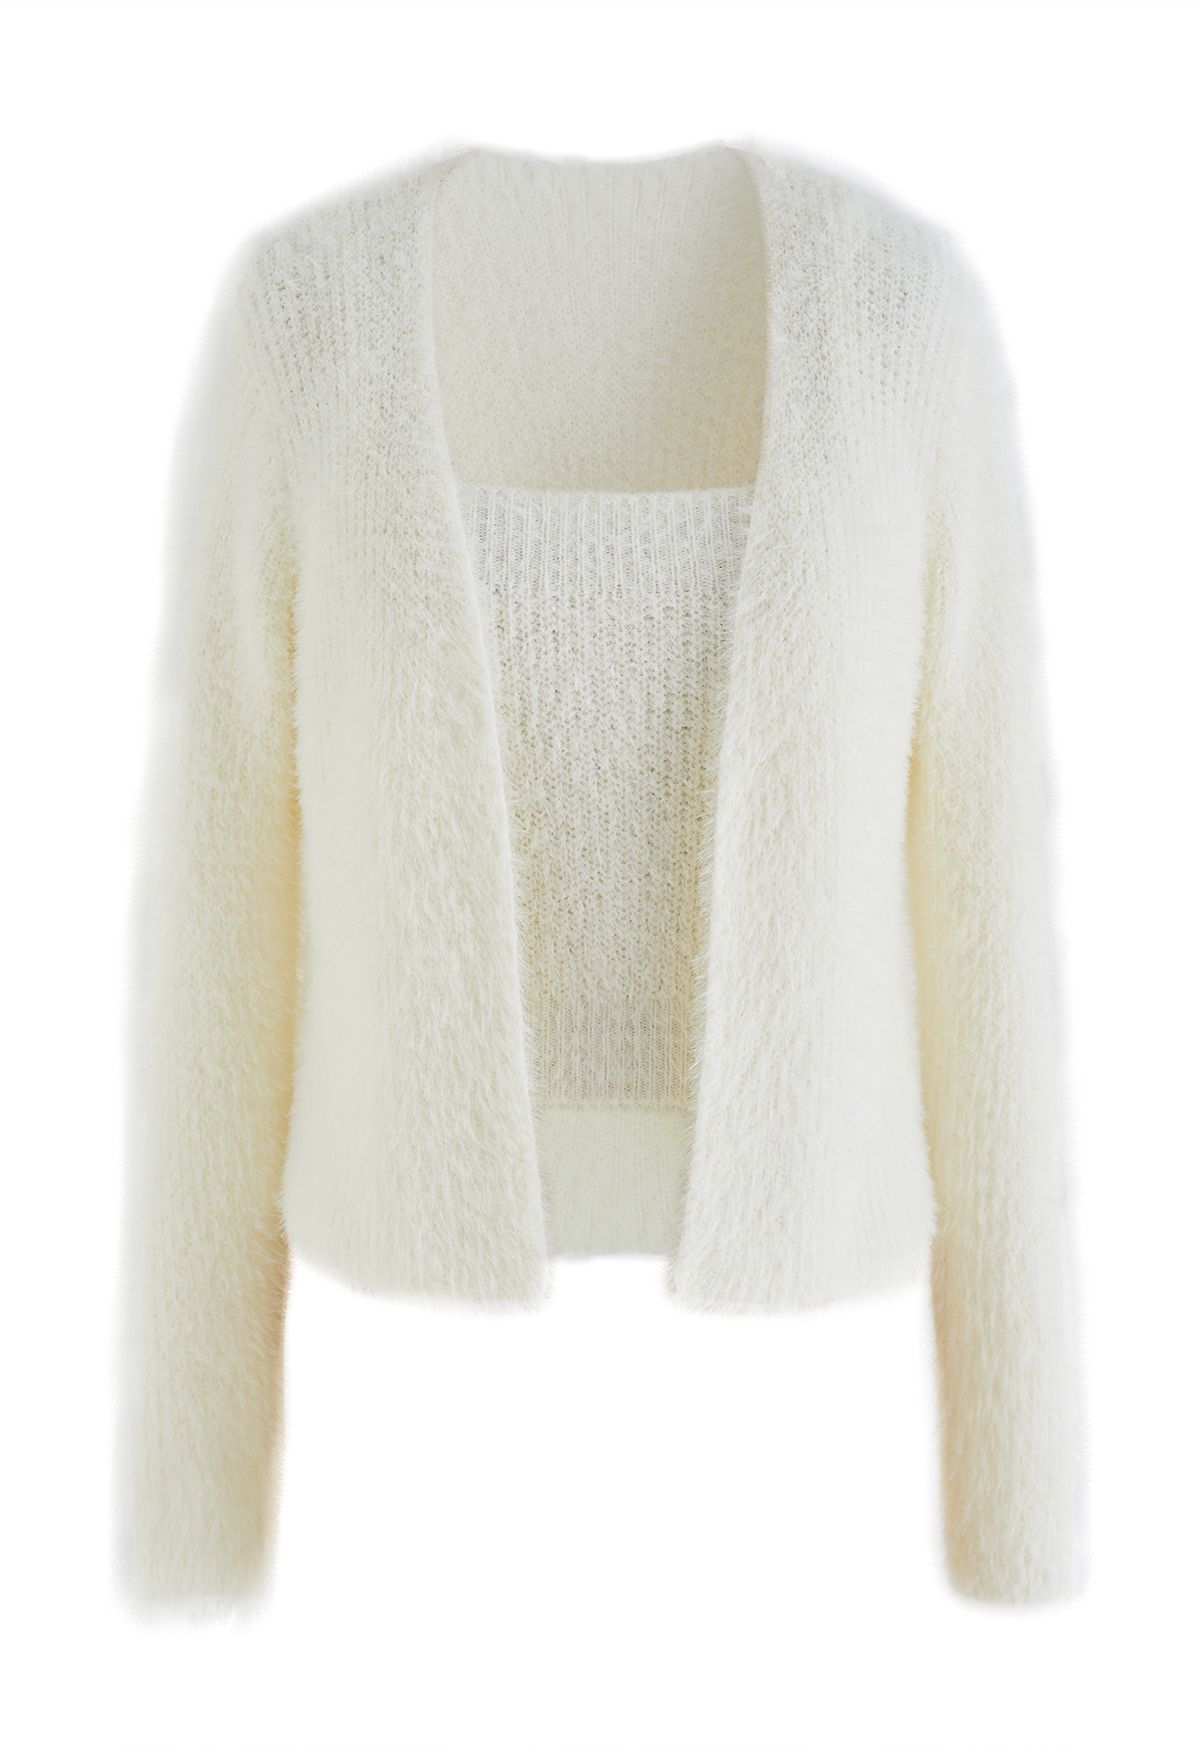 Extra Soft Fuzzy Knit Cami Top and Cardigan Set in Cream - Retro